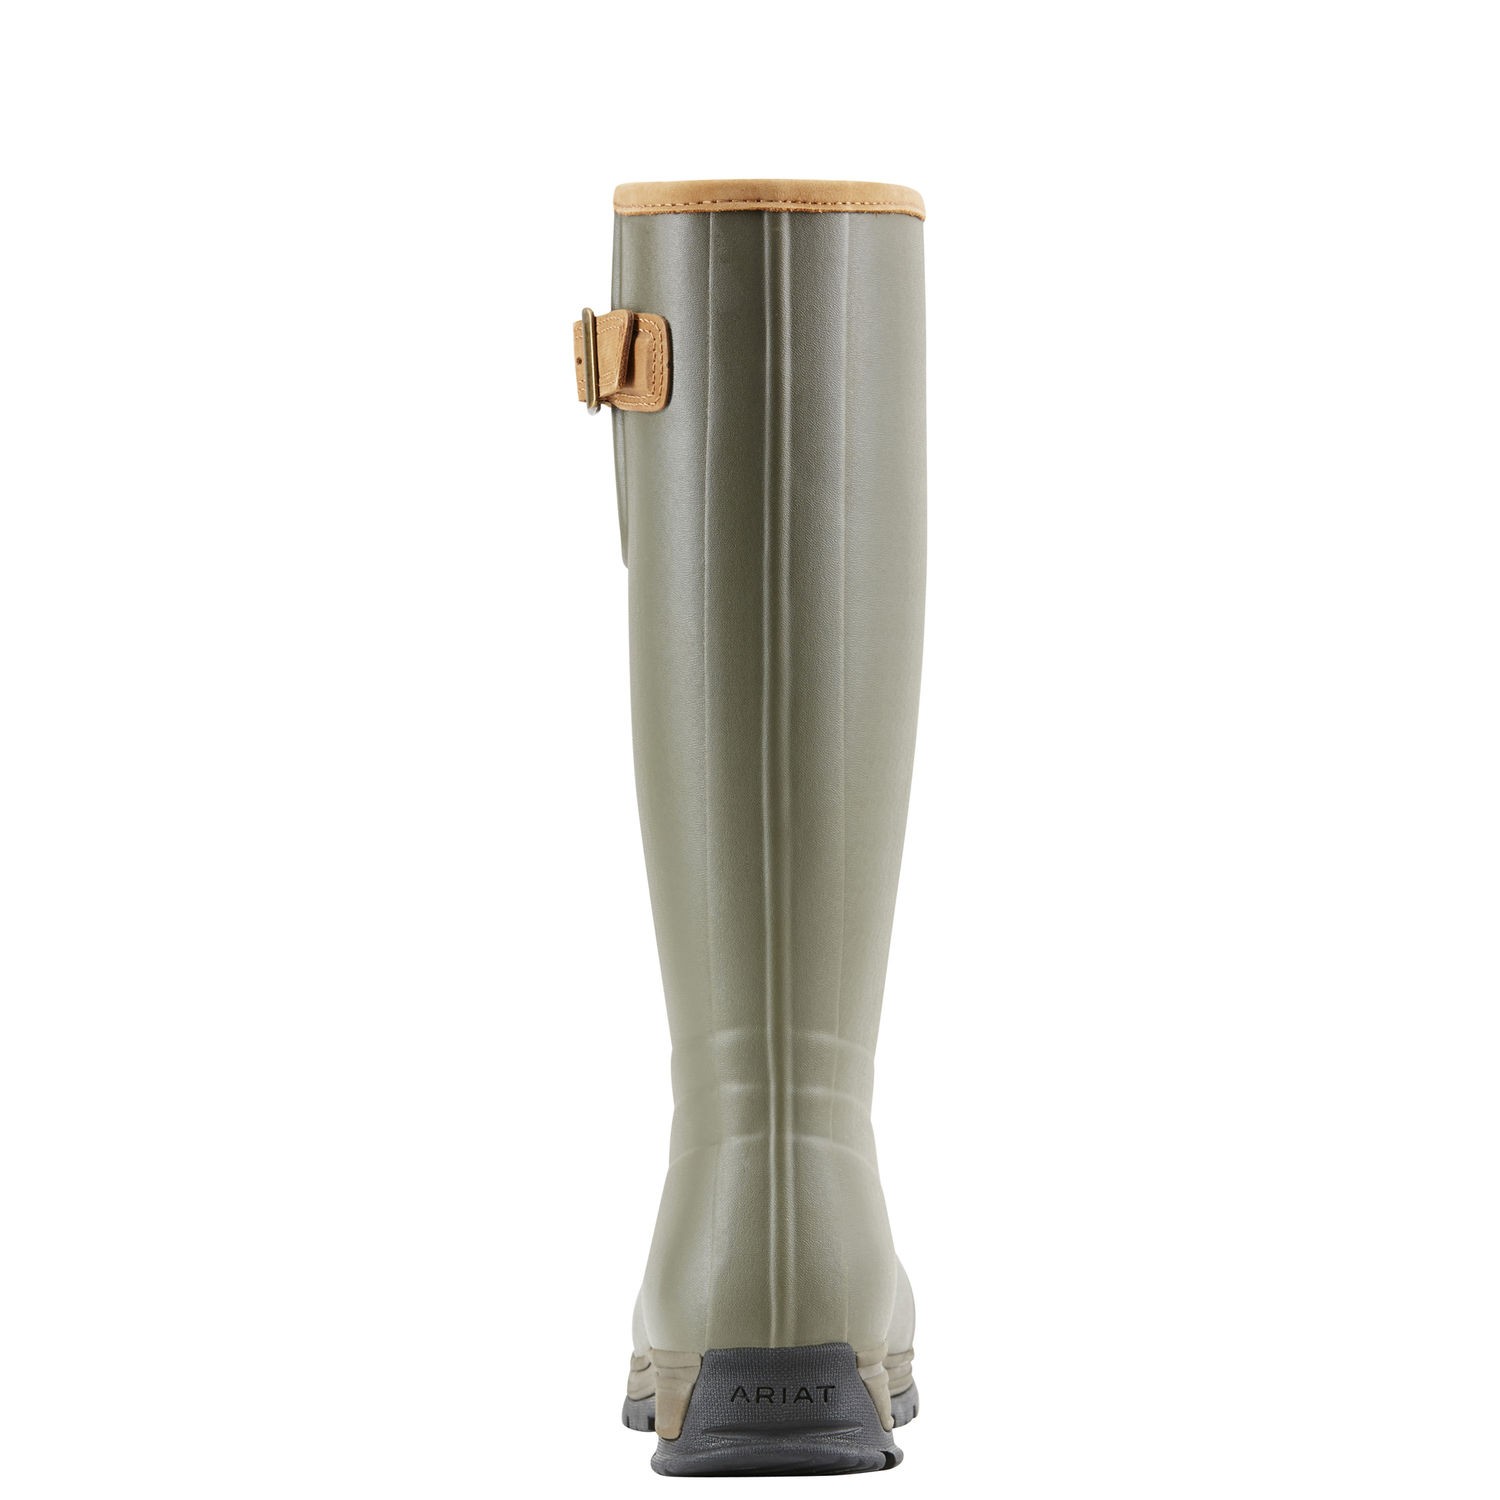 Ariat Women's Burford Wellington Boots Olive Green - Old Dairy Saddlery